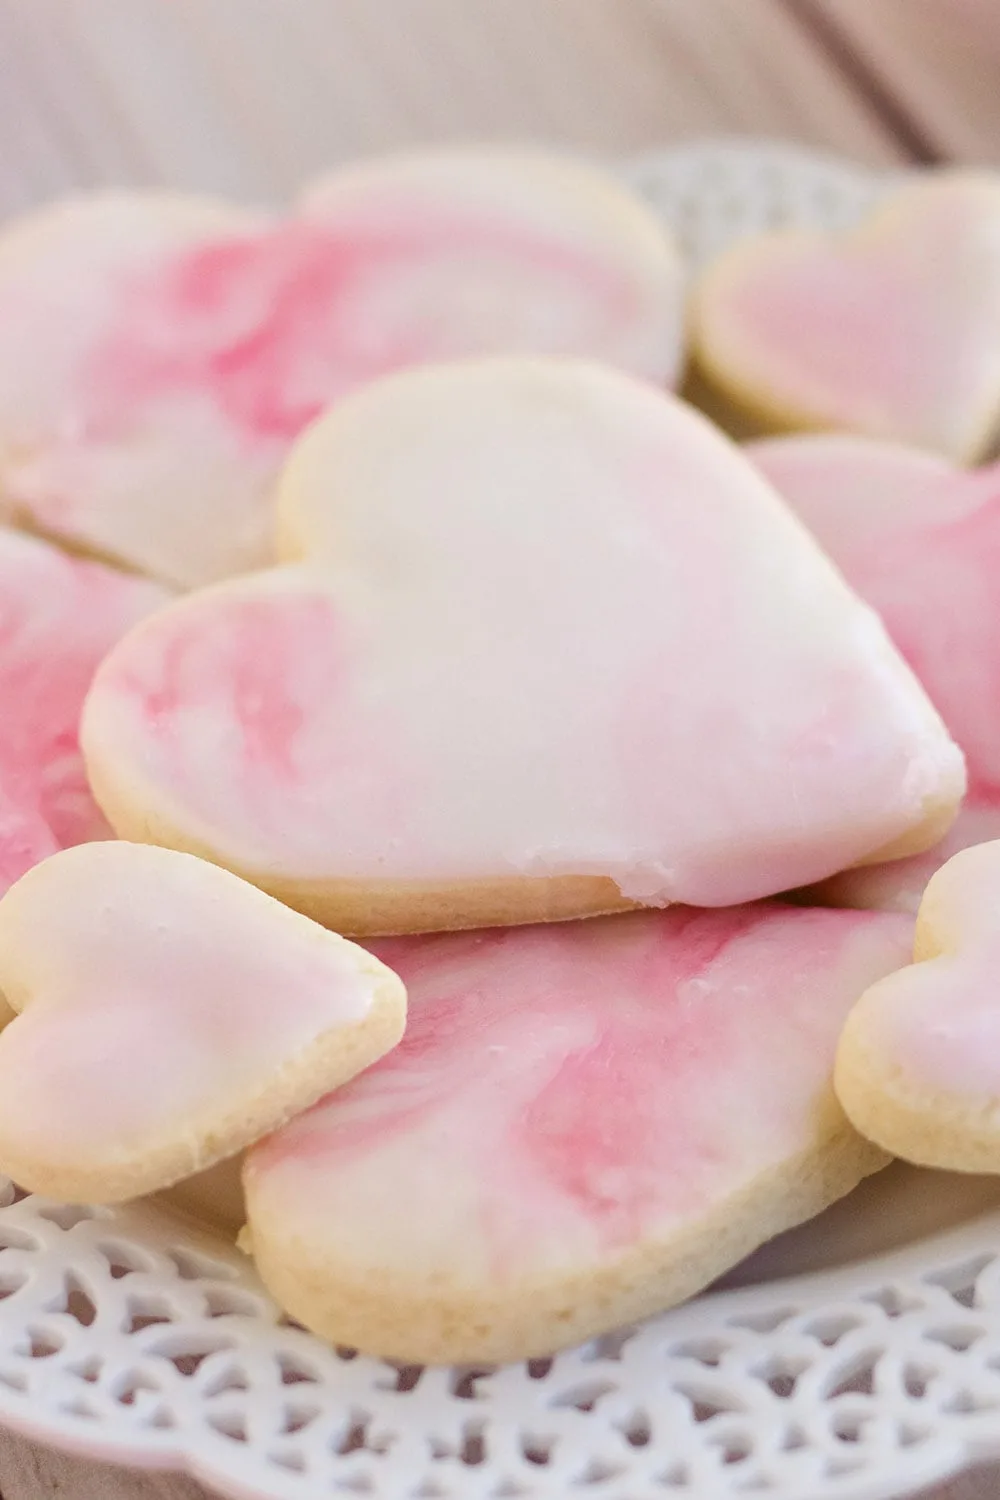 Pile of heart cookies with pink icing on a plate.